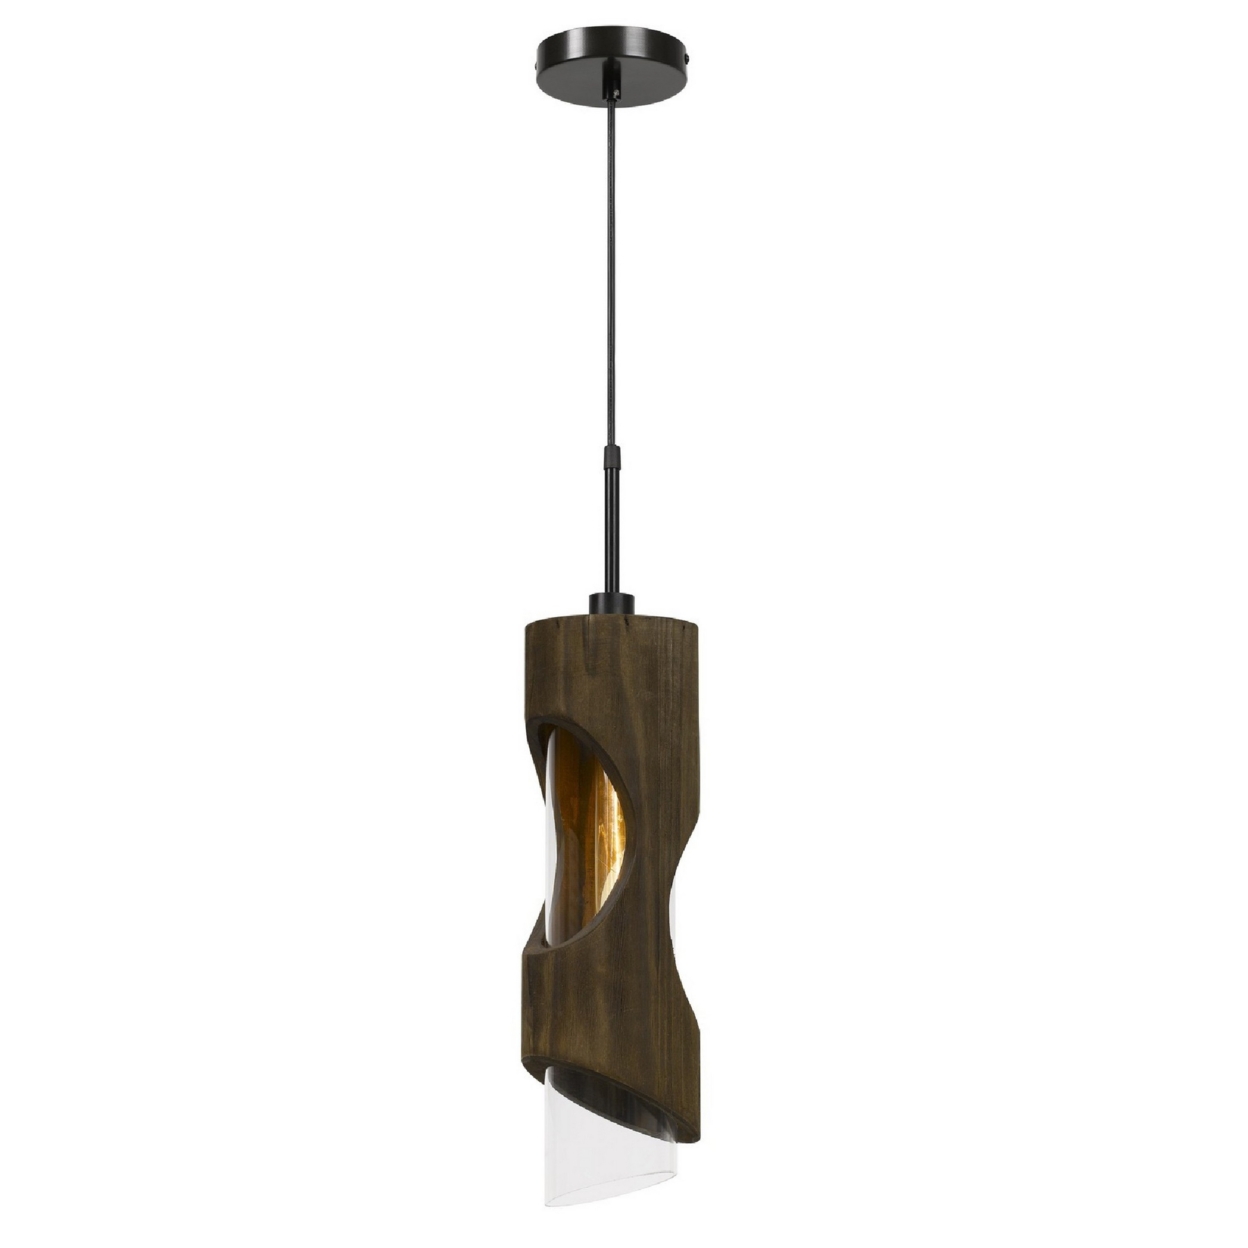 6 Inch Modern Pendent Light With Glass Shade, Wood Accent, Metal, Brown- Saltoro Sherpi